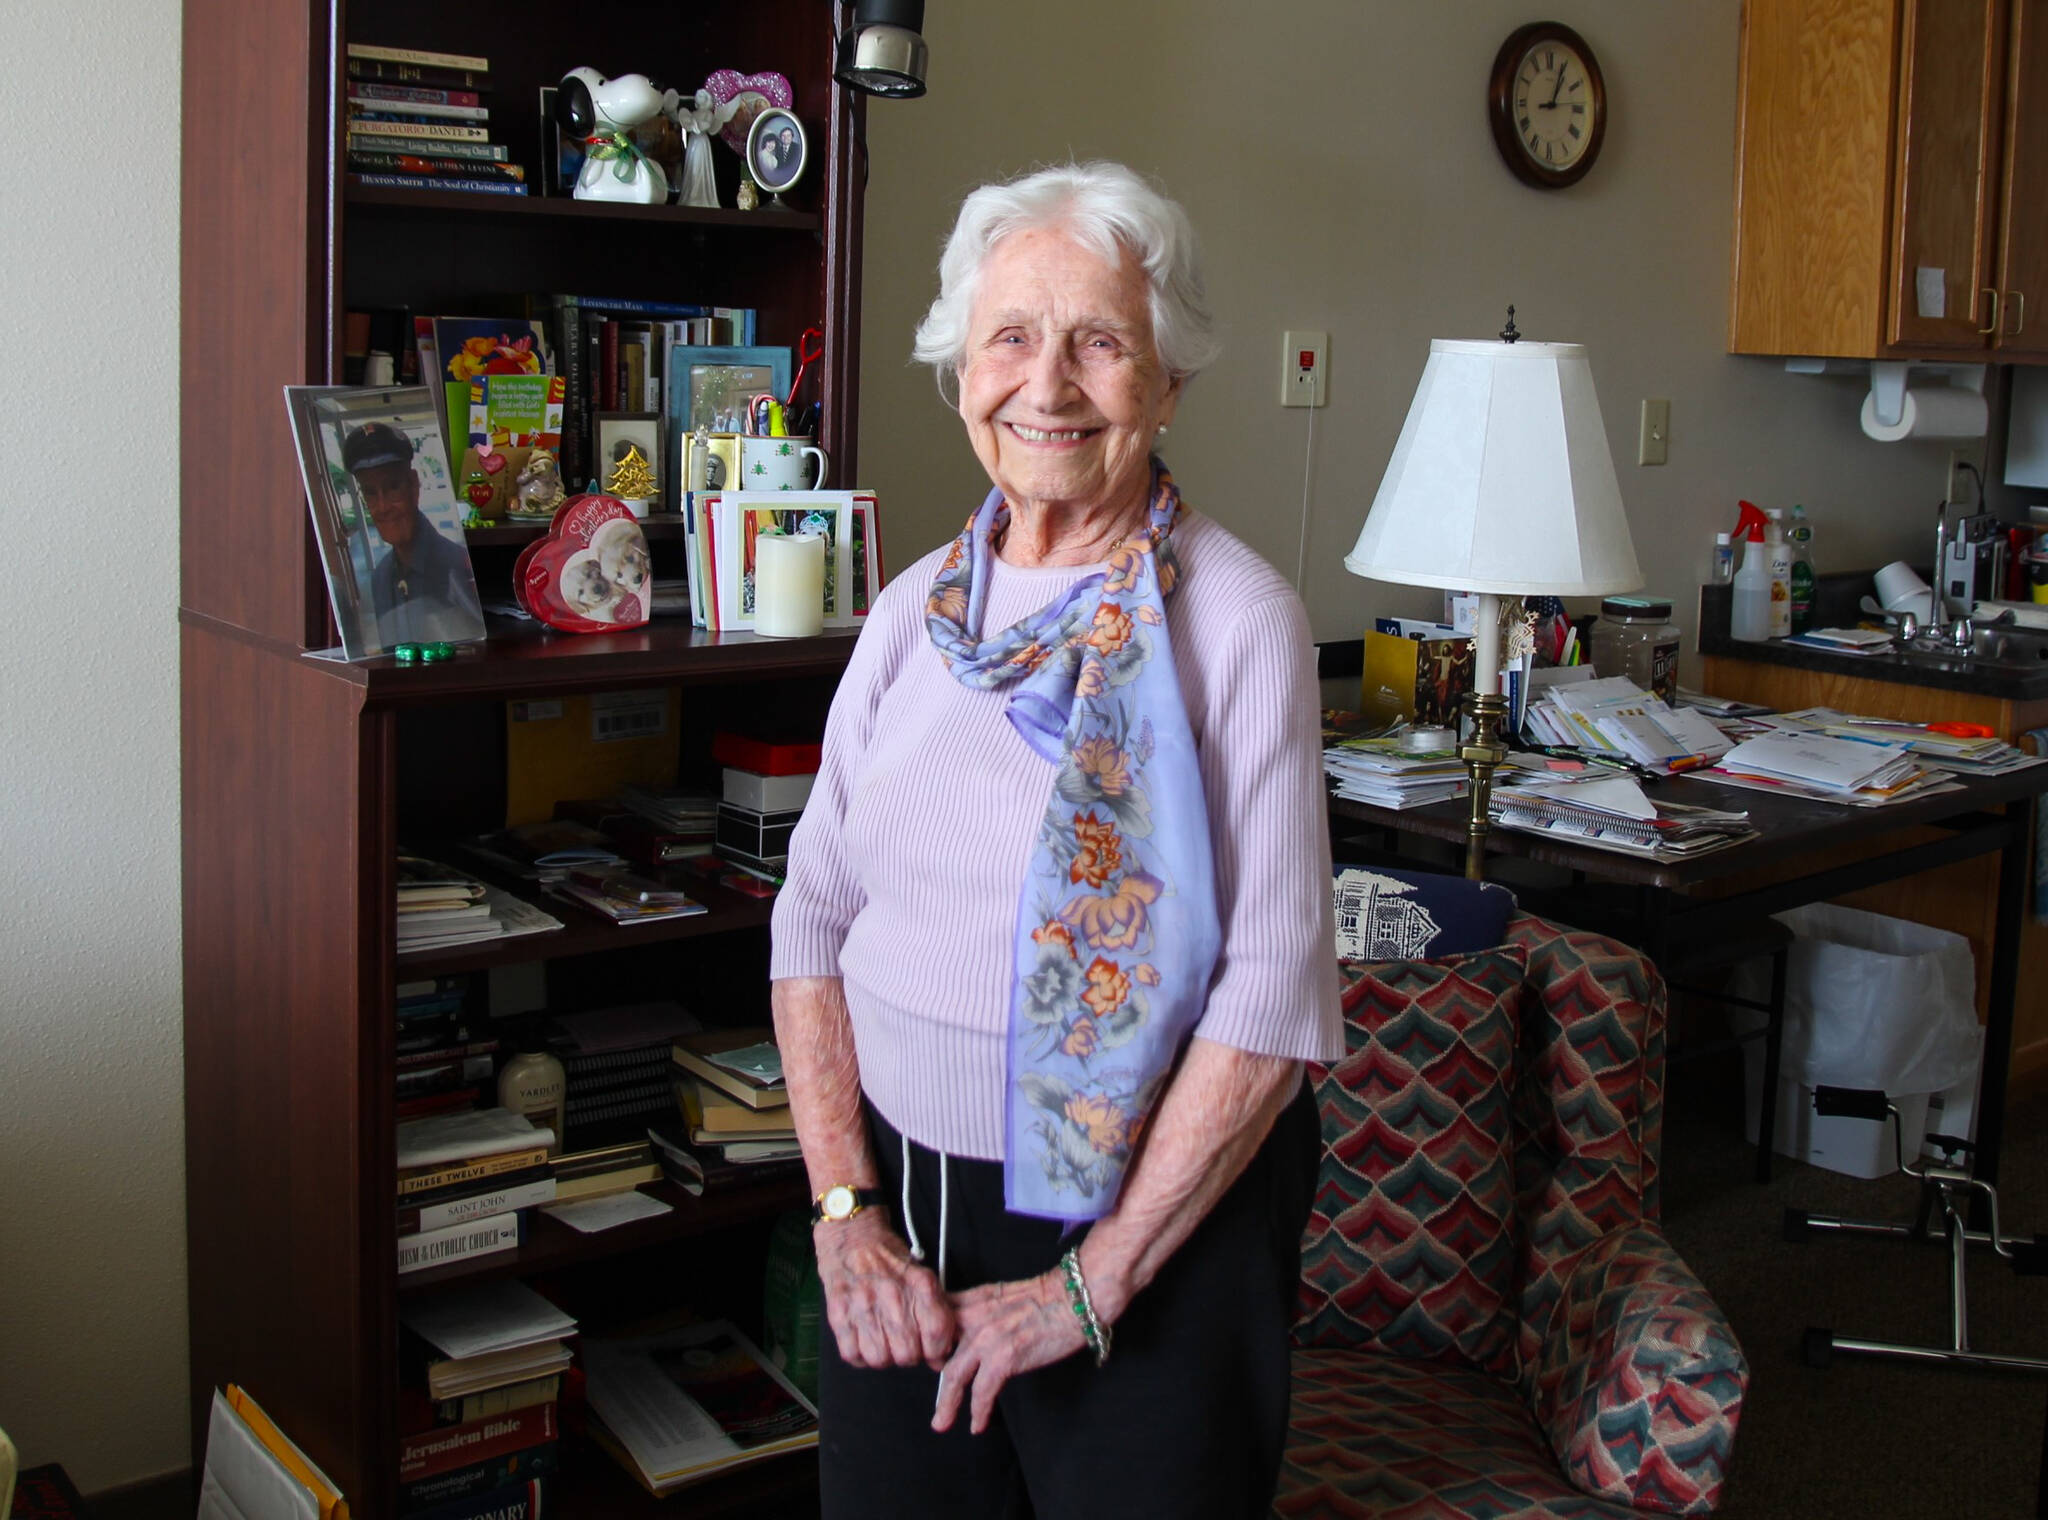 Joan Andrew smiles in her apartment at the Maple Ridge community in Freeland. (Photo by Luisa Loi)